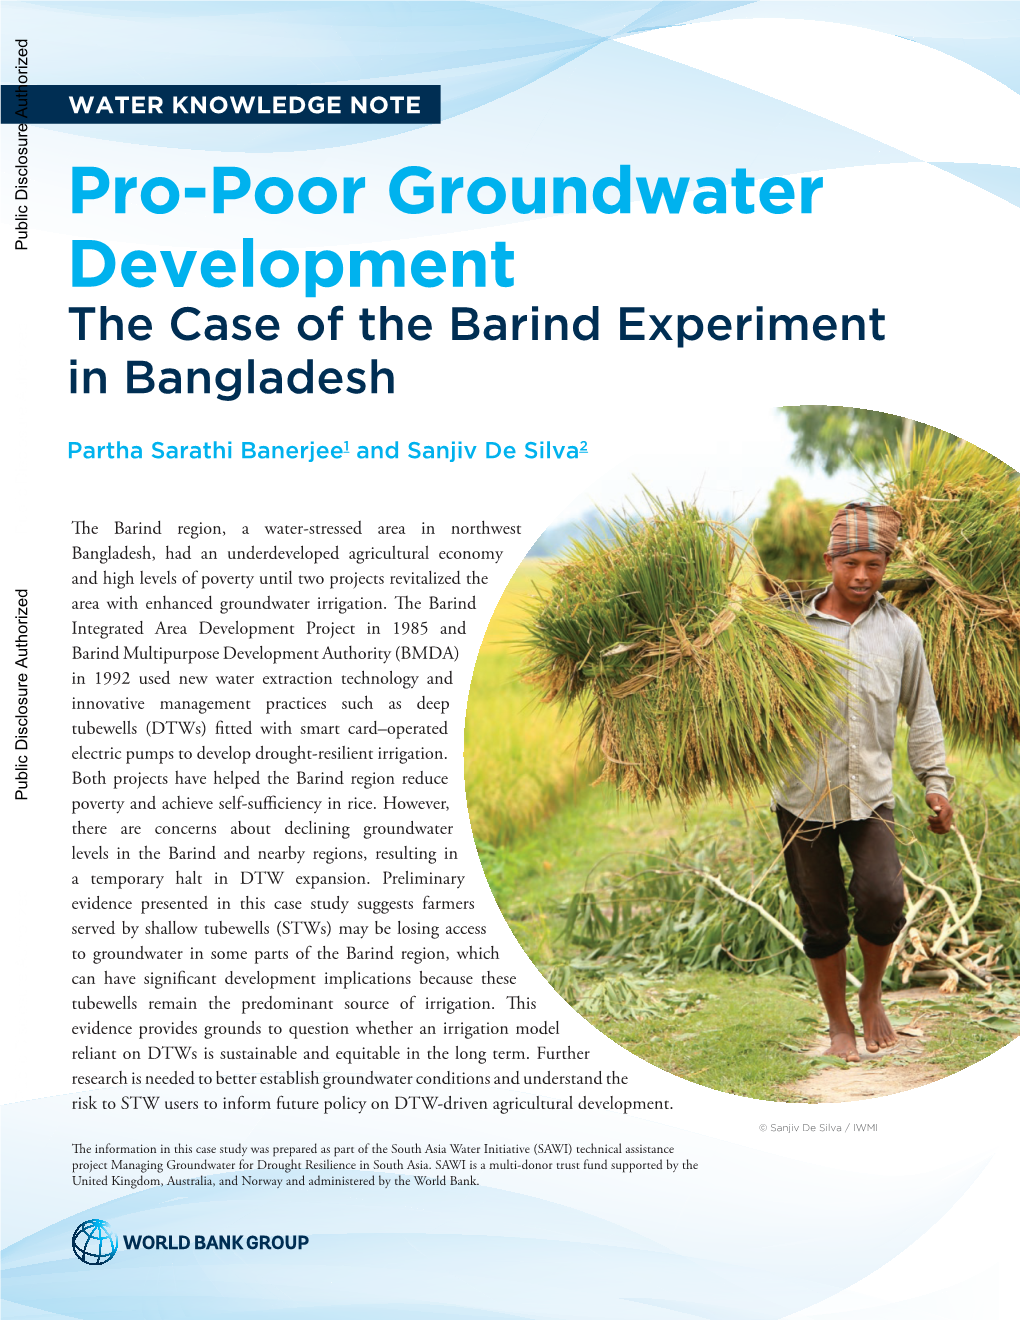 Pro-Poor Groundwater Development: the Case of the Barind Experiment In